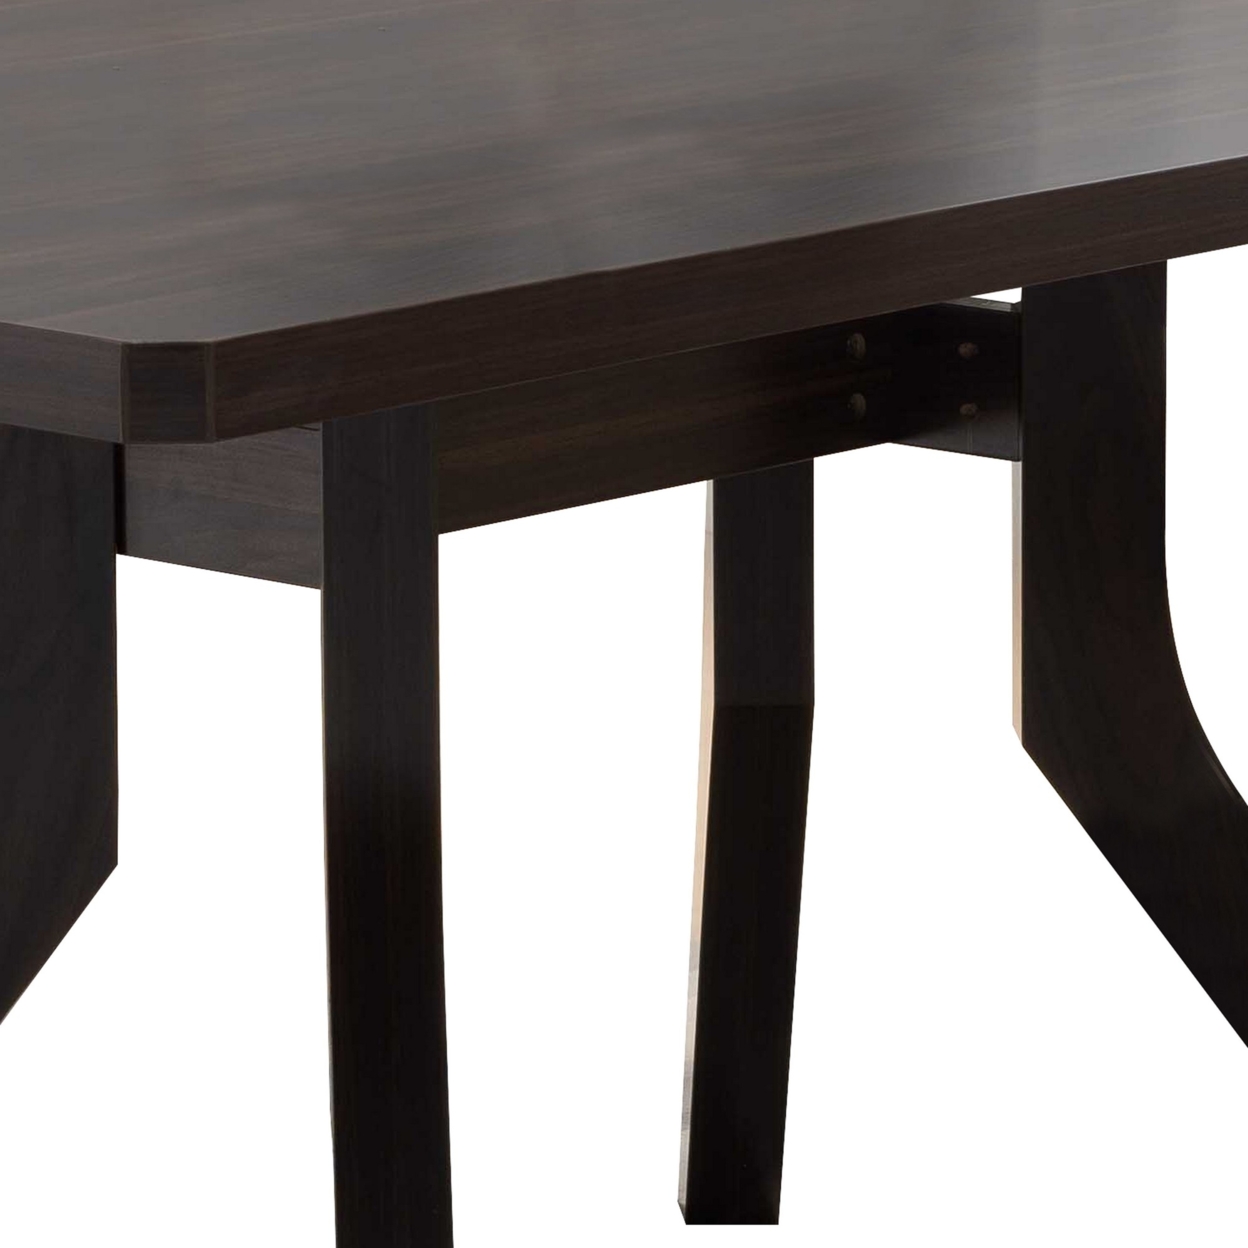 Dining Table With Wooden Top And Angled Legs, Brown- Saltoro Sherpi